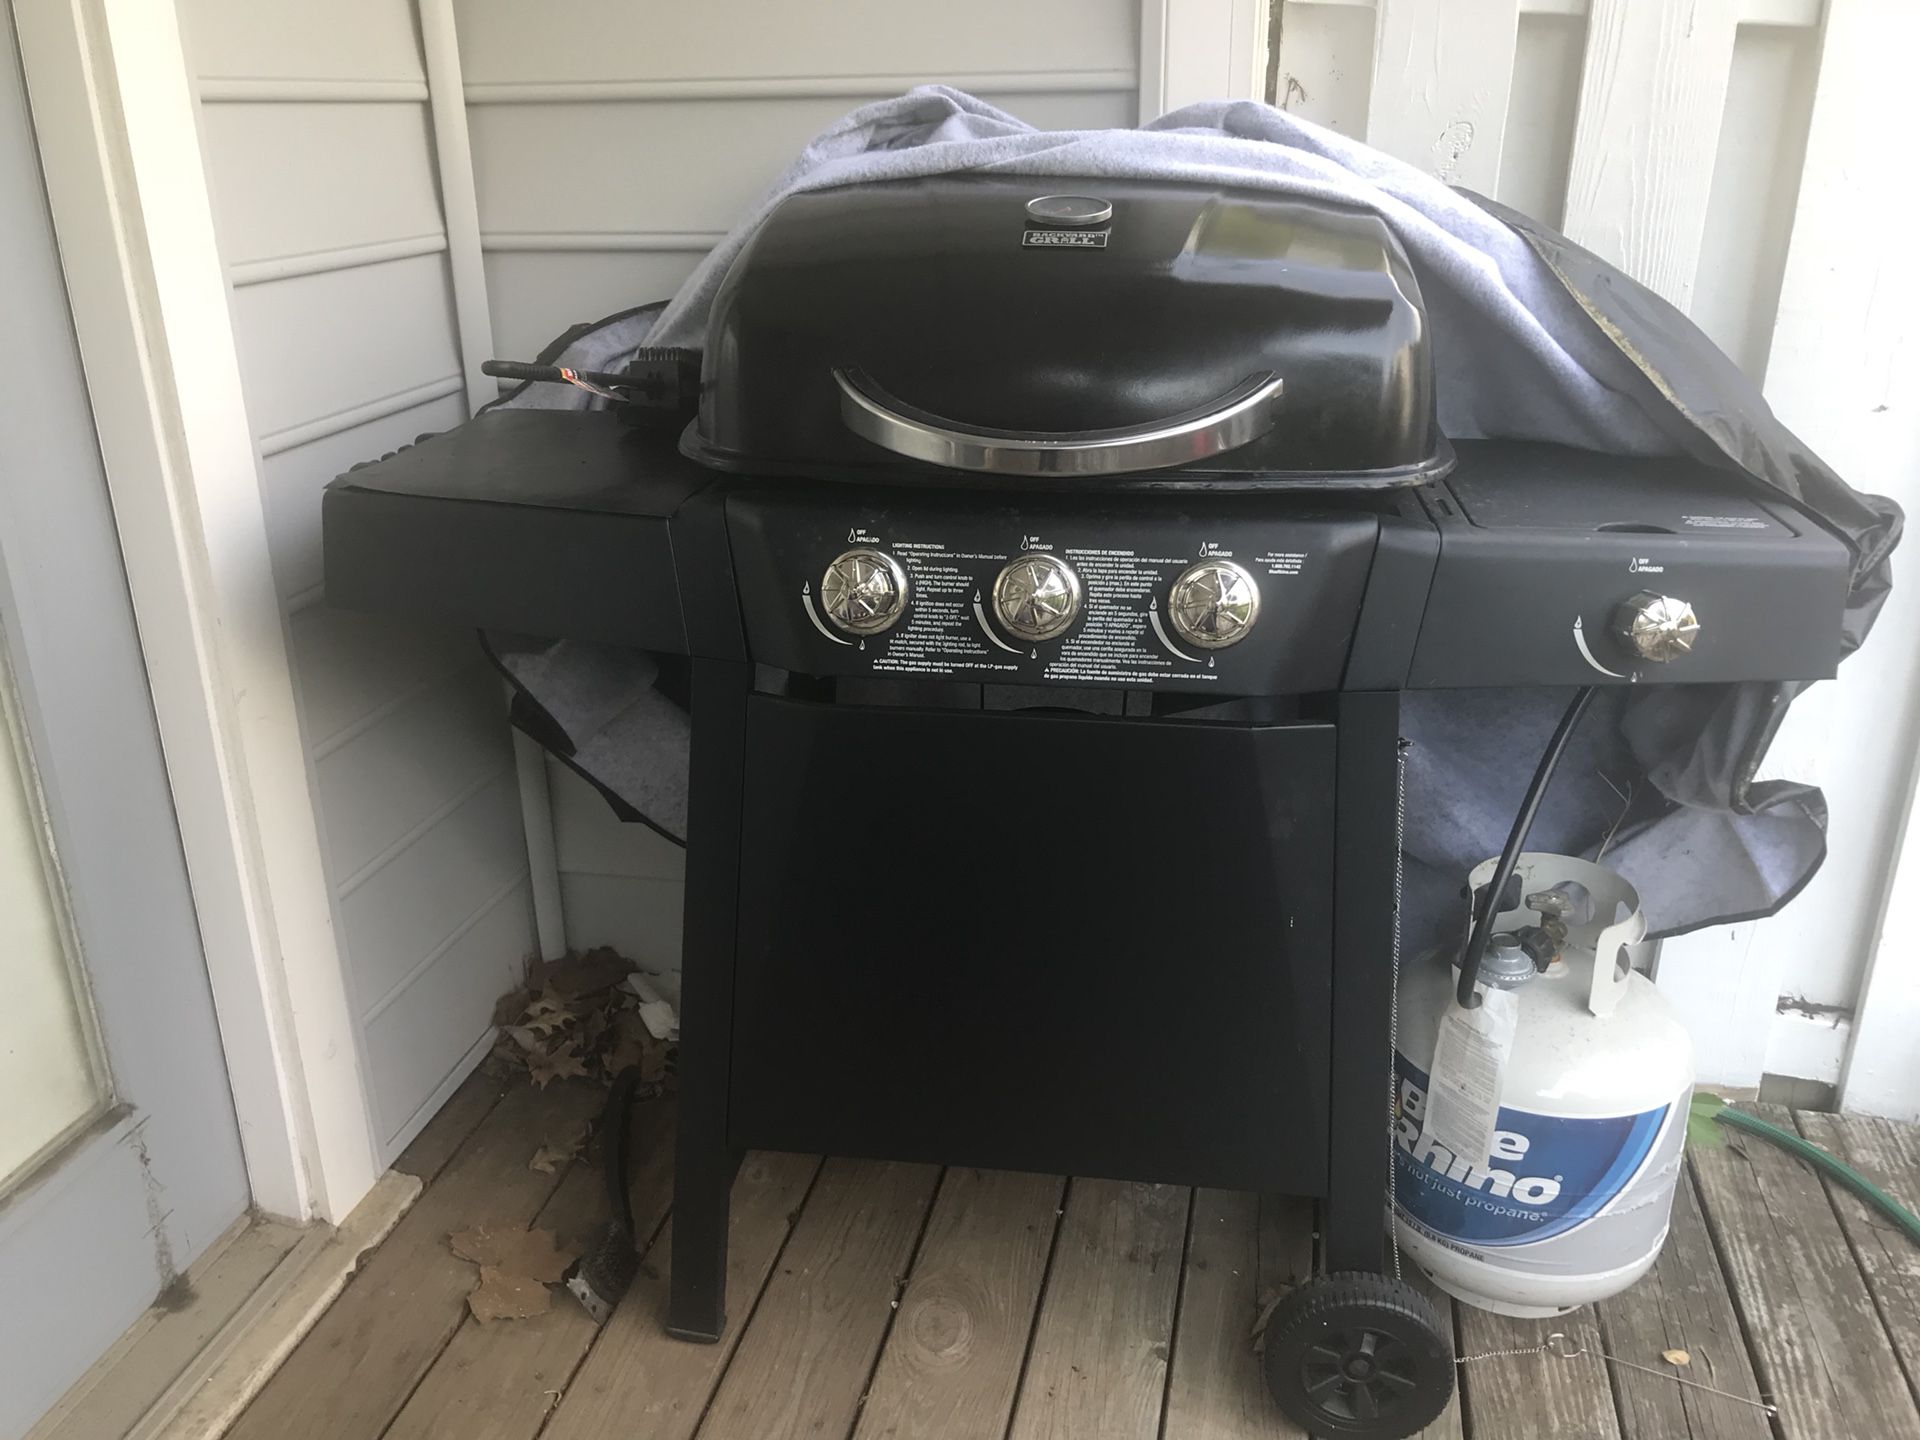 Barely used Backyard Grill + propane + grill cover